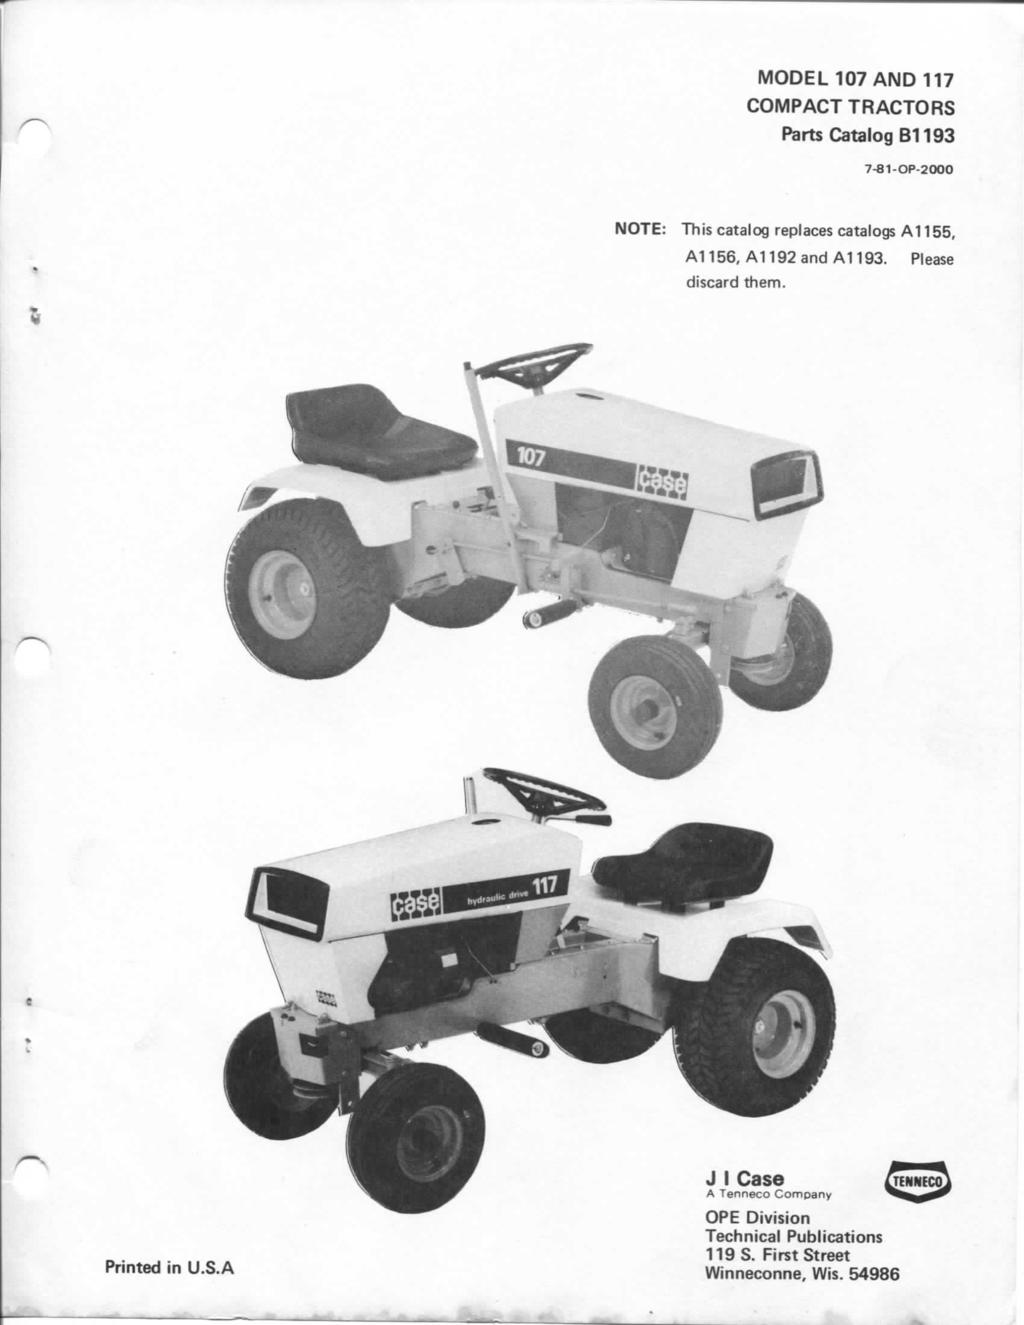 MODEL 107 AND 117 COMPACT TRACTORS Parts Catalog B1193 7-81-OP-2000 NOTE: This catalog replaces catalogs A1155, Al 156,